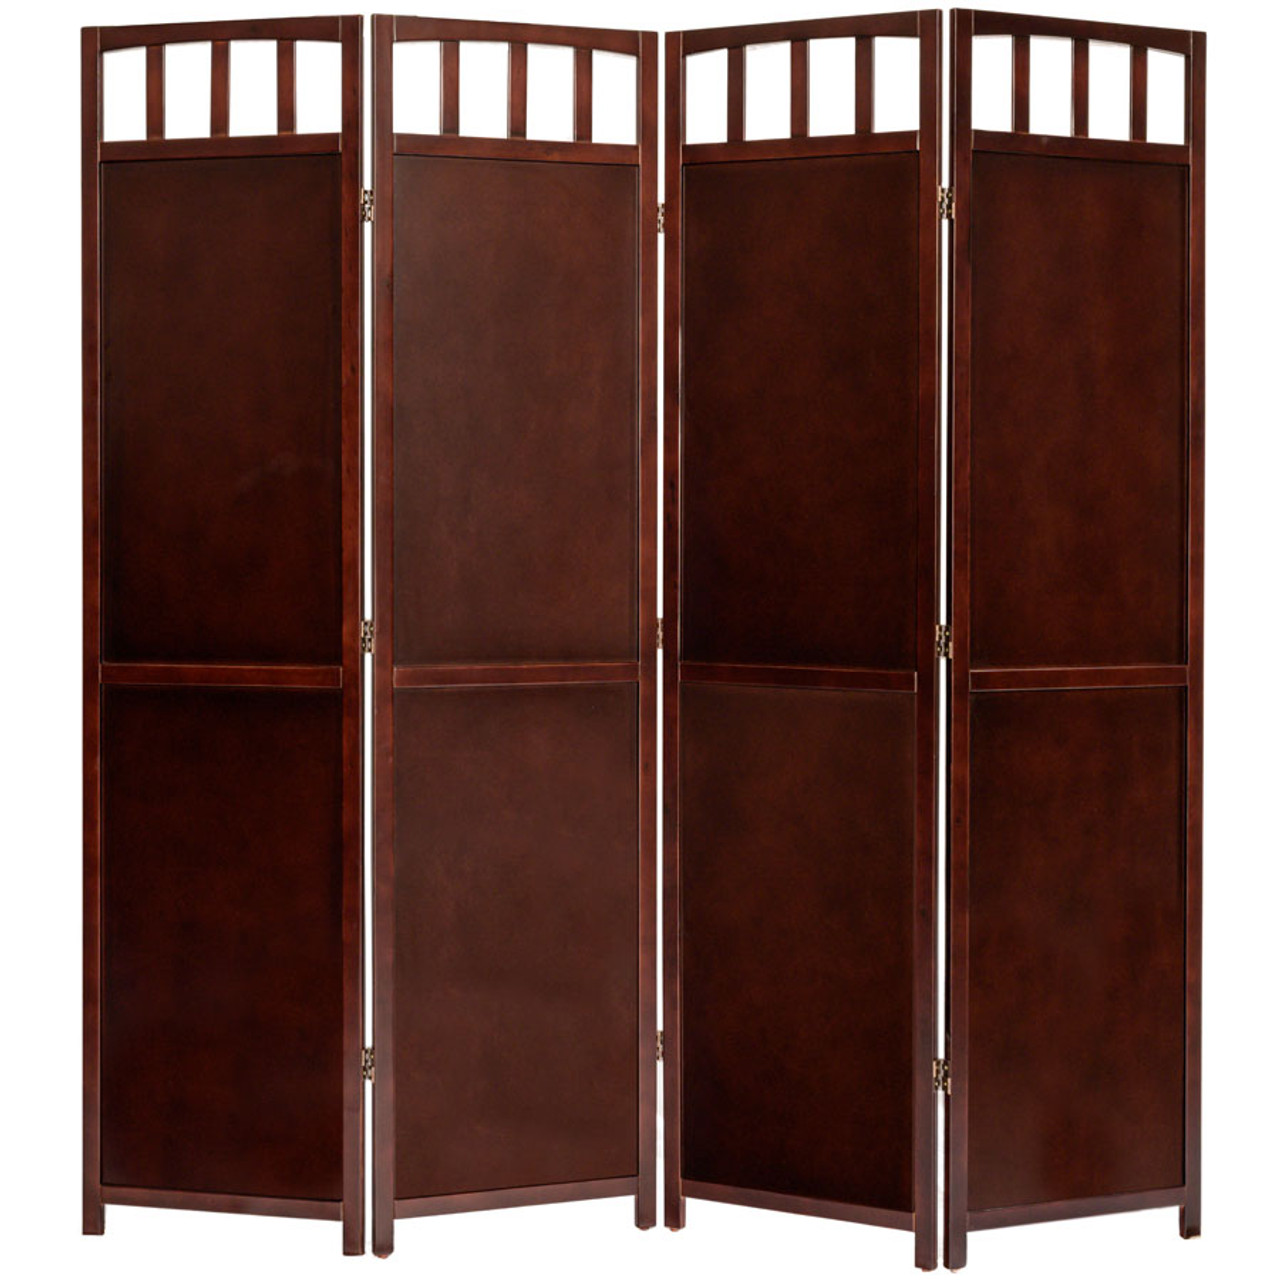 3 or 4 Panels Room Divider Privacy Screen Solid Wood  70" Tall Espresso